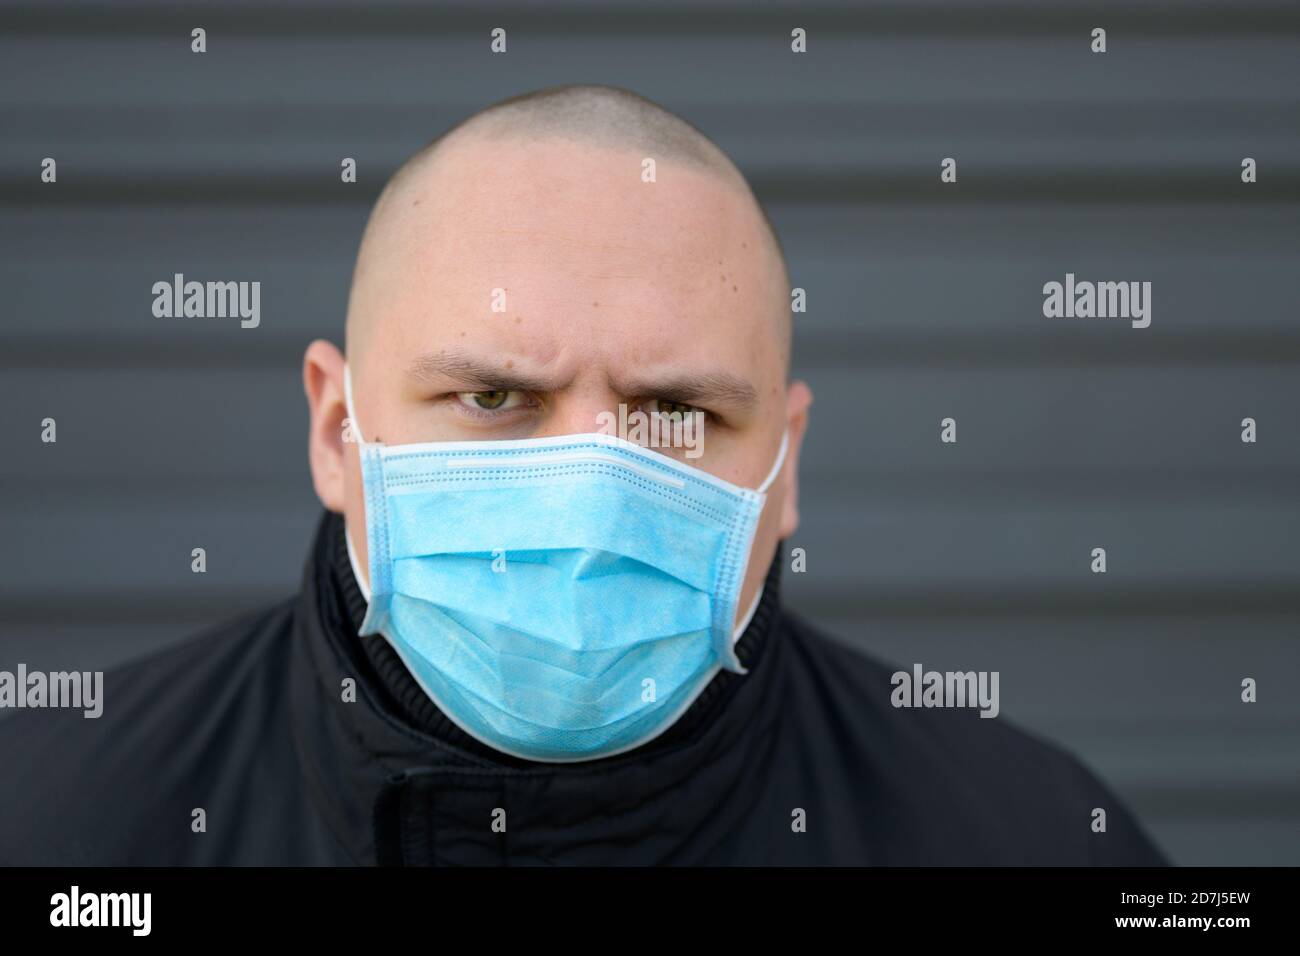 Angry young man wearing a surgical face mask frowning as he looks with a determined expression during the Covid-19 pandemic against a grey exterior wa Stock Photo